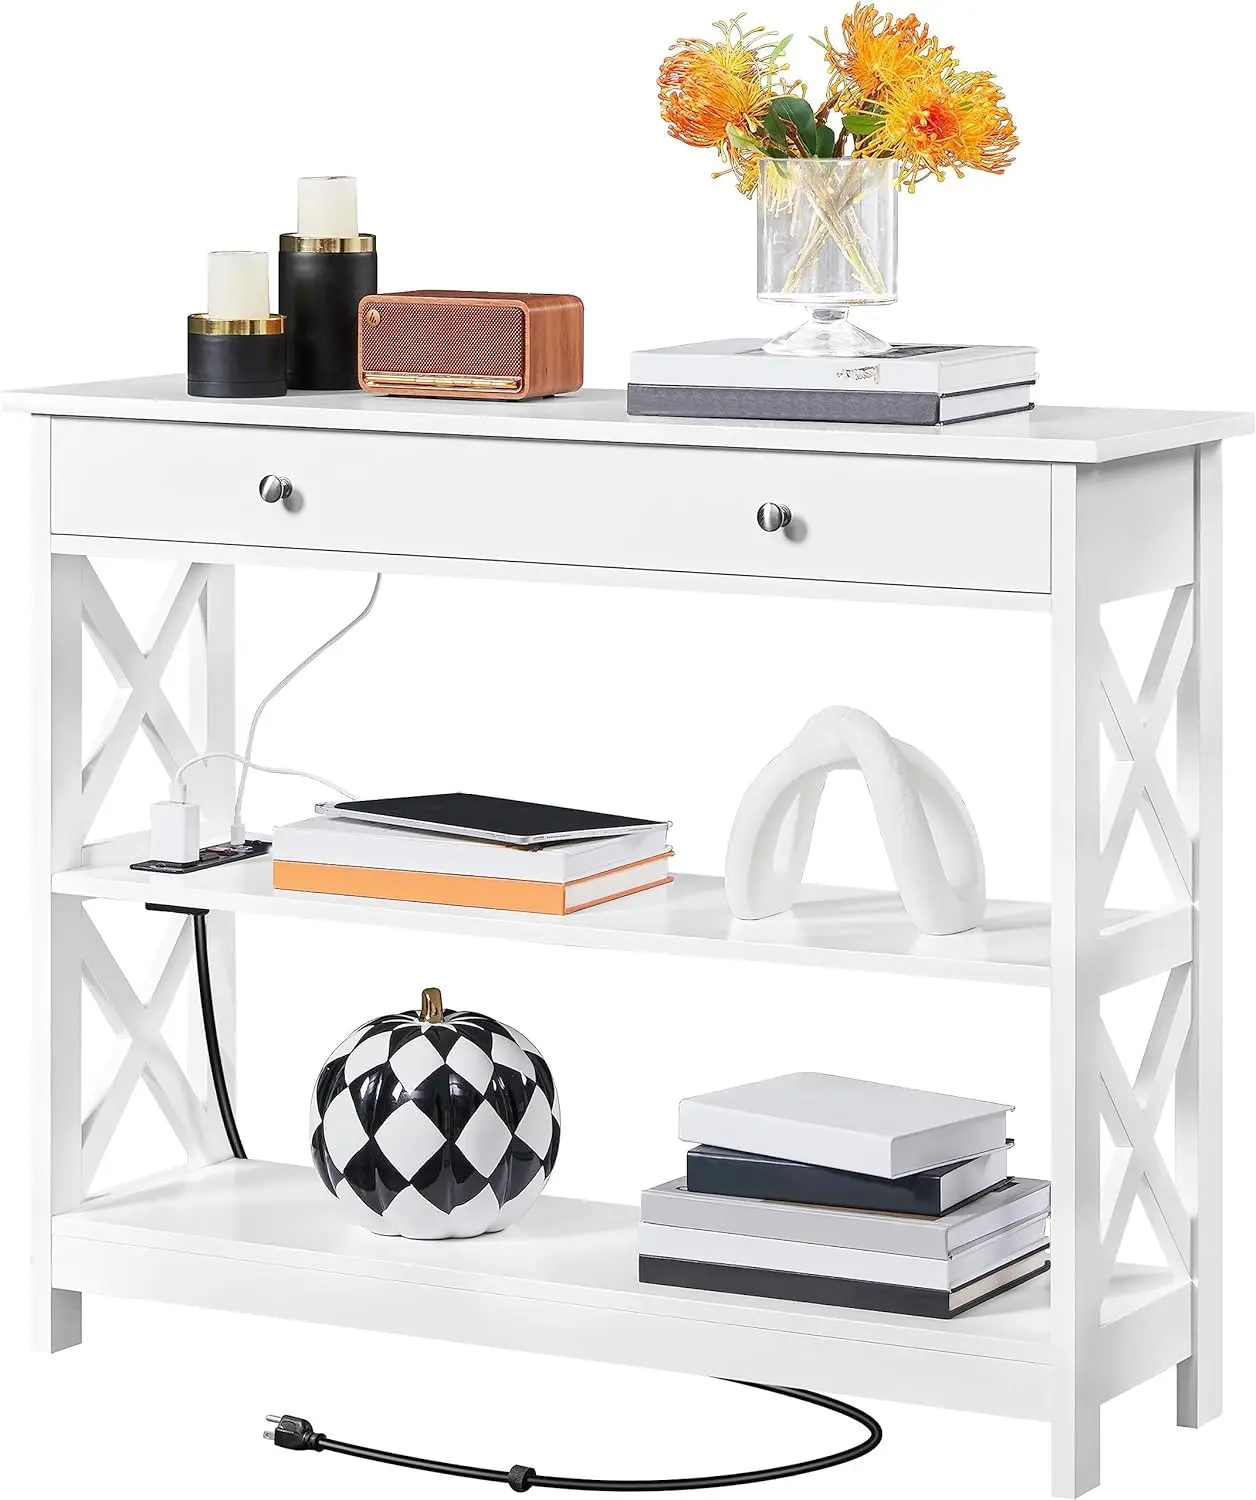 

Entryway Table with Drawer, Wood Console Table with Outlets and USB Ports, Sofa Table Narrow Long with Storage Shelves